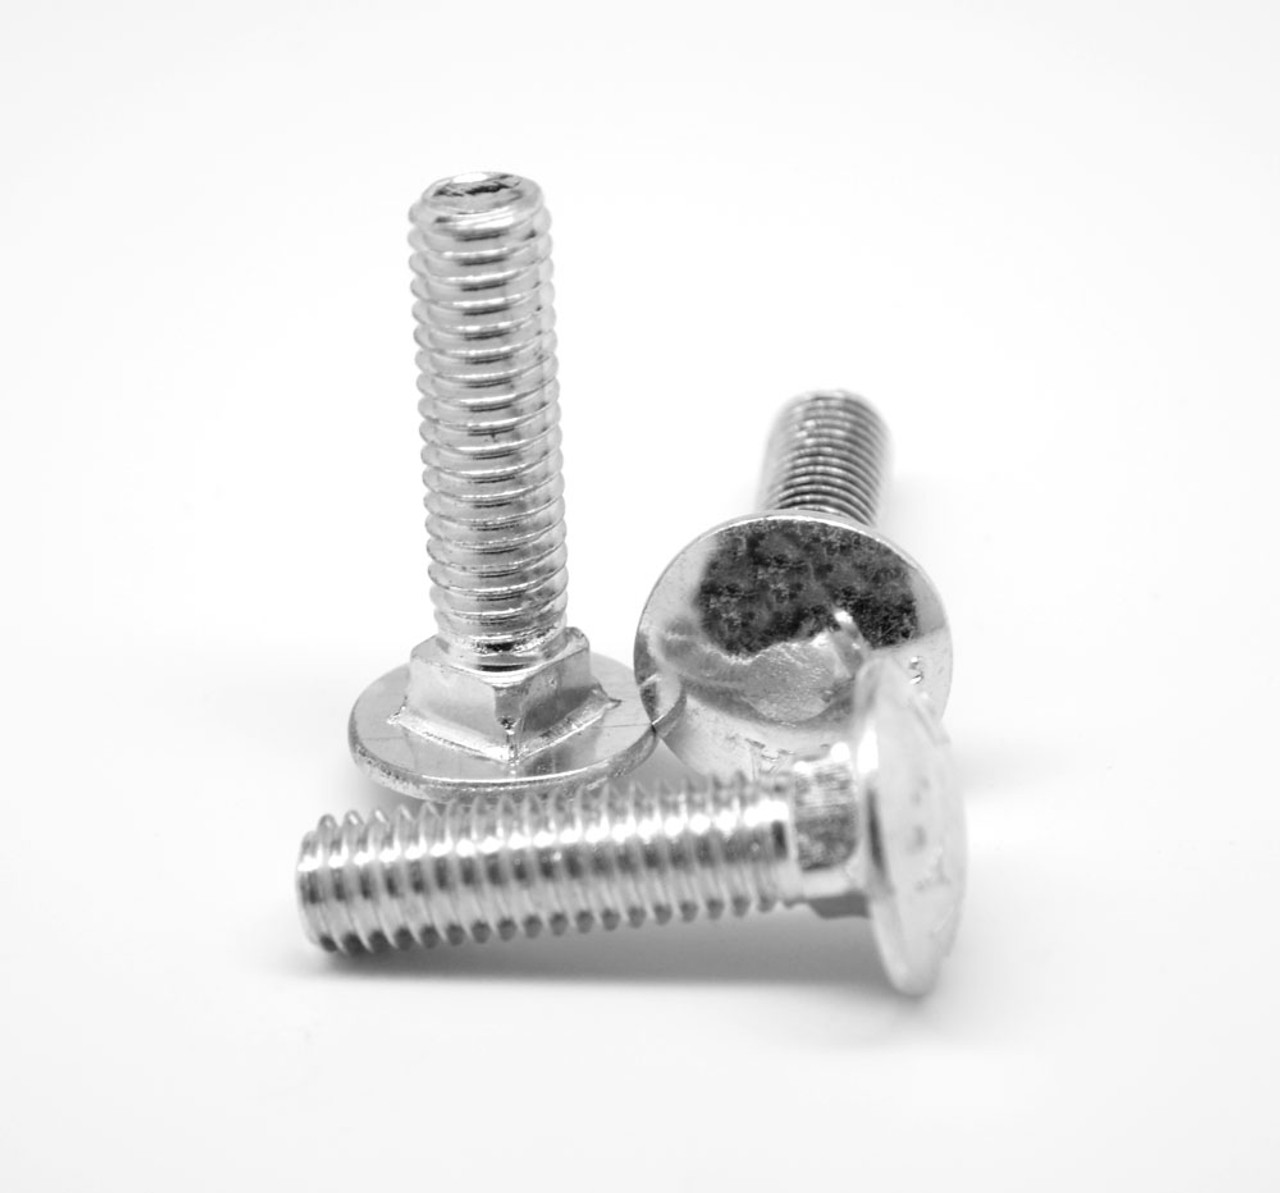 3/8"-16 x 1 3/4" (FT) Coarse Thread A307 Grade A Carriage Bolt Low Carbon Steel Zinc Plated